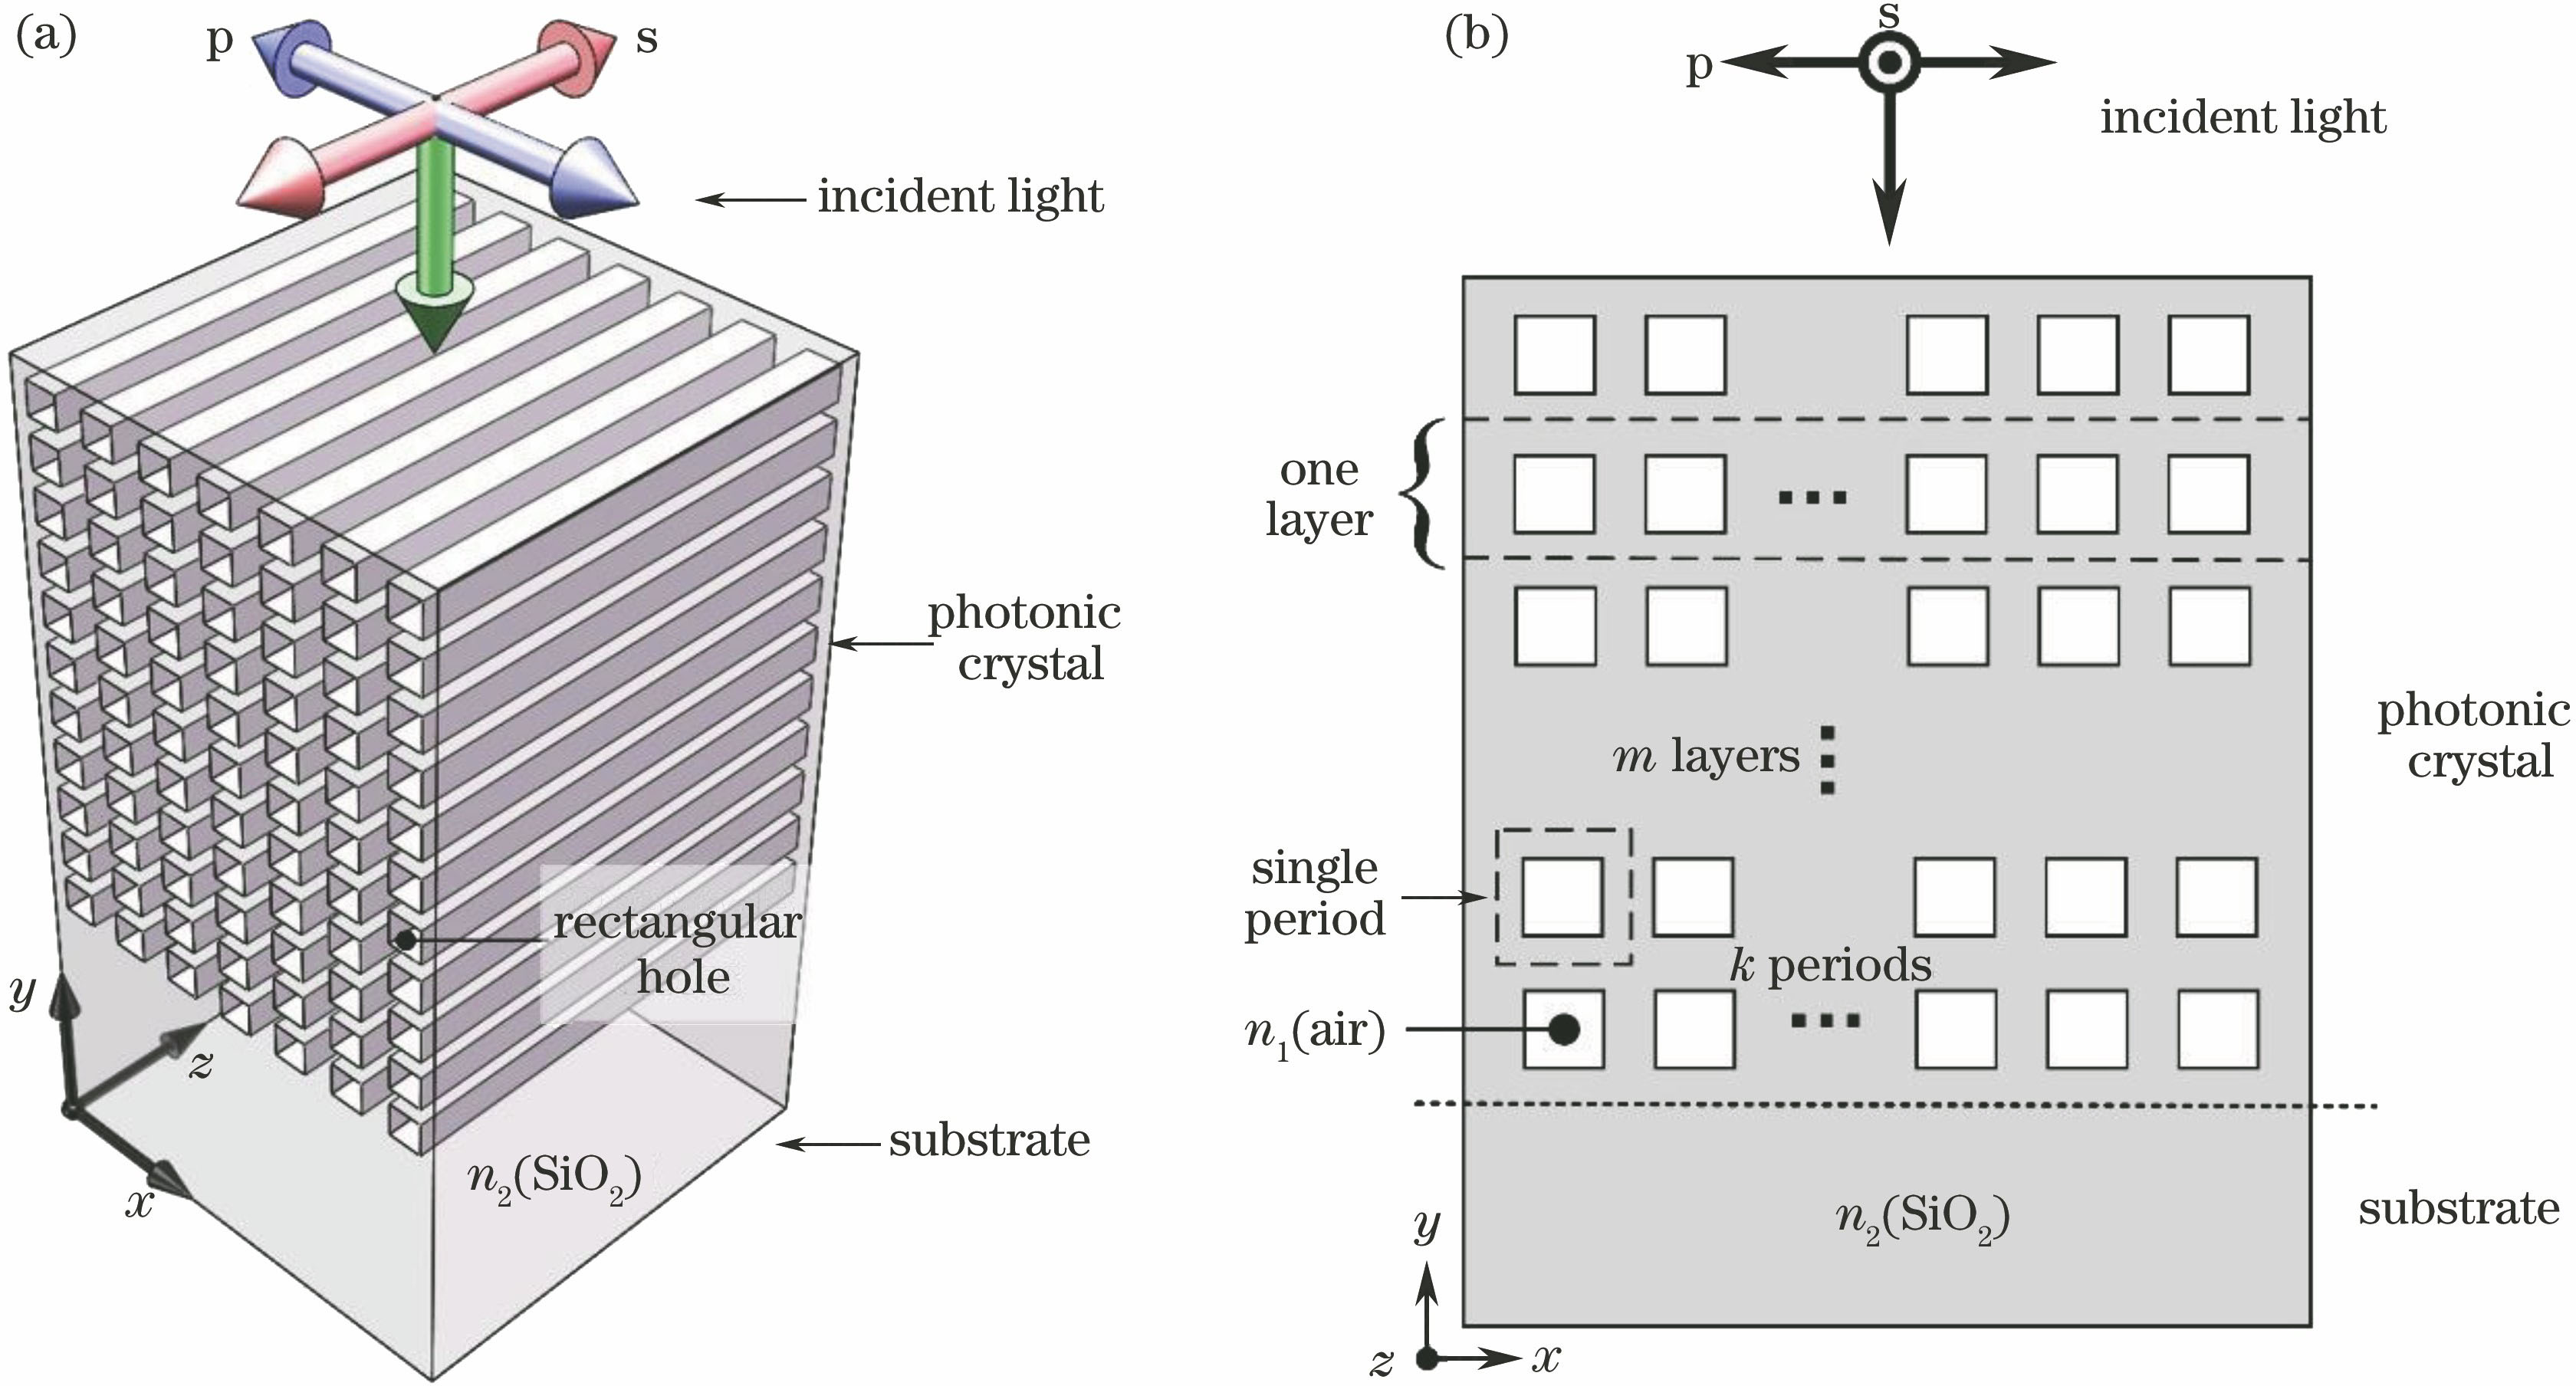 Schematic of photonic crystal with periodic rectangular holes. (a) Three-dimensional model; (b) two-dimensional model in x-y plane